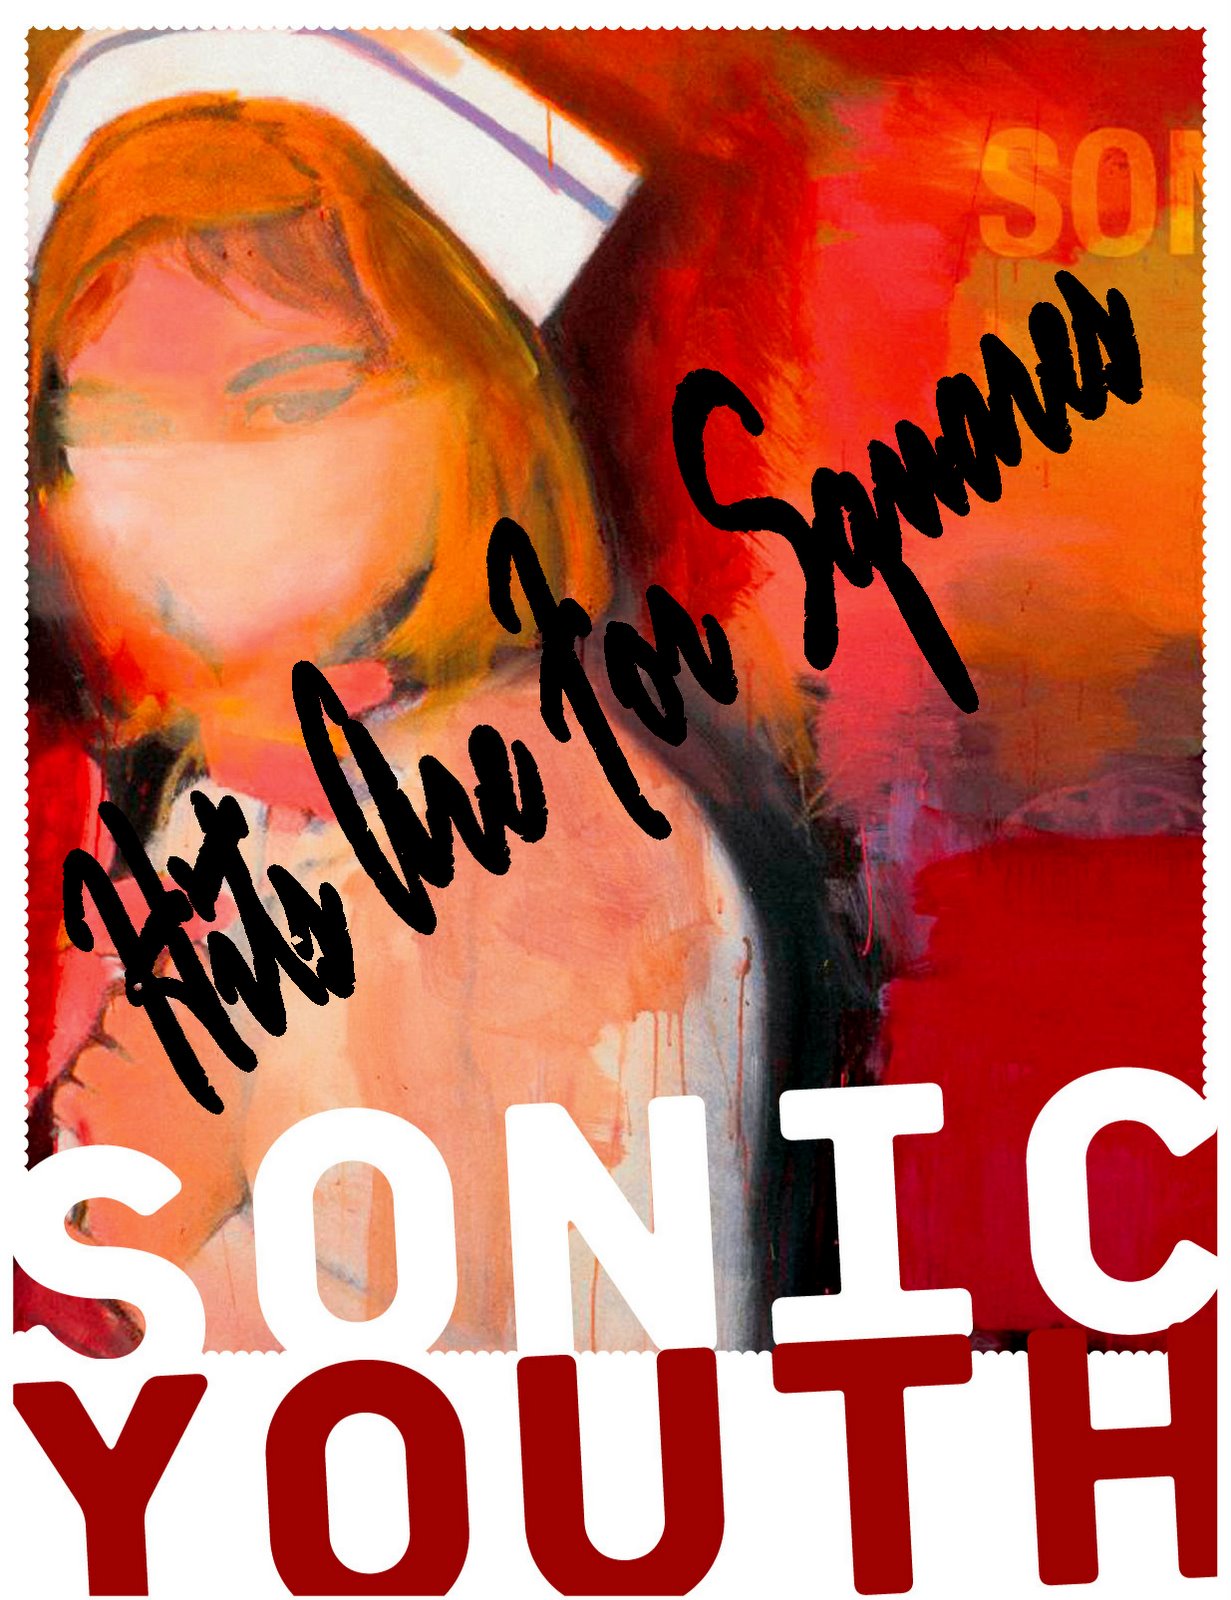 [sonic_youth_cover.bmp]